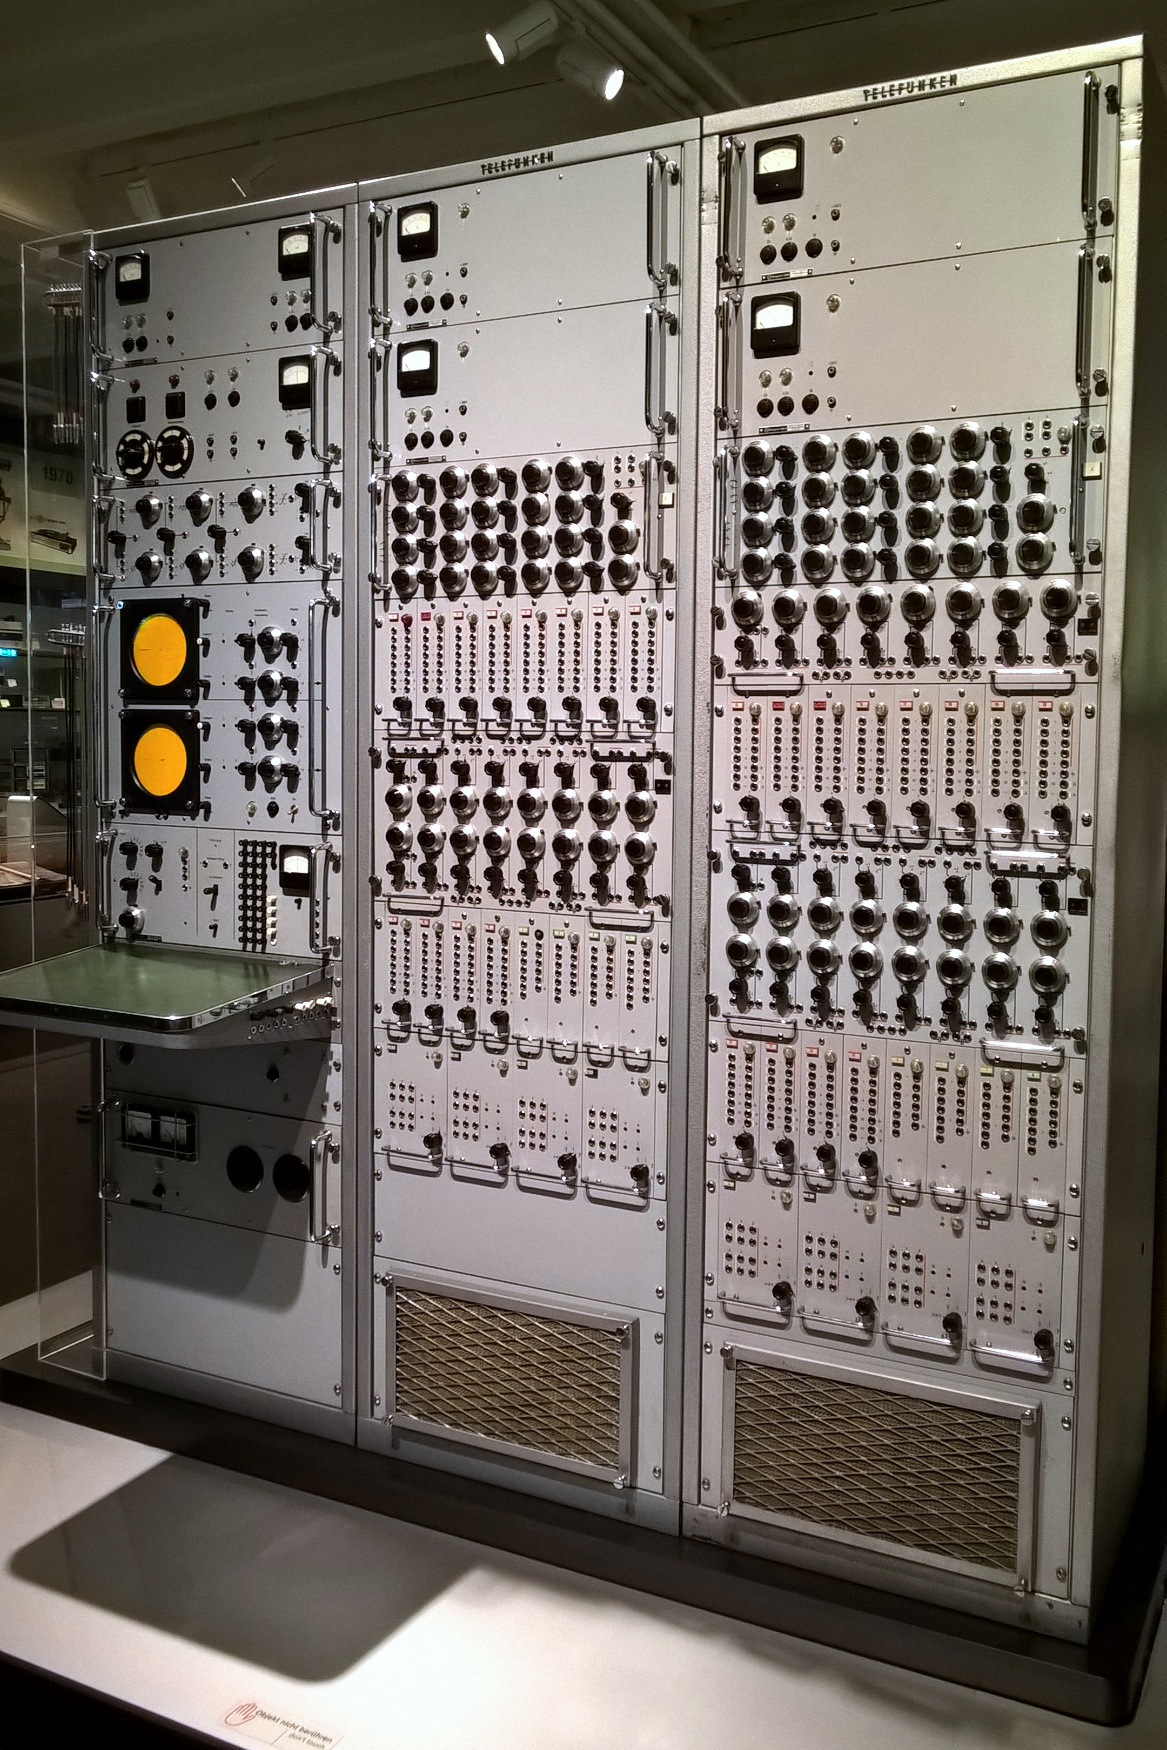 Telefunken analogue computer on display at Vienna Technical Museum